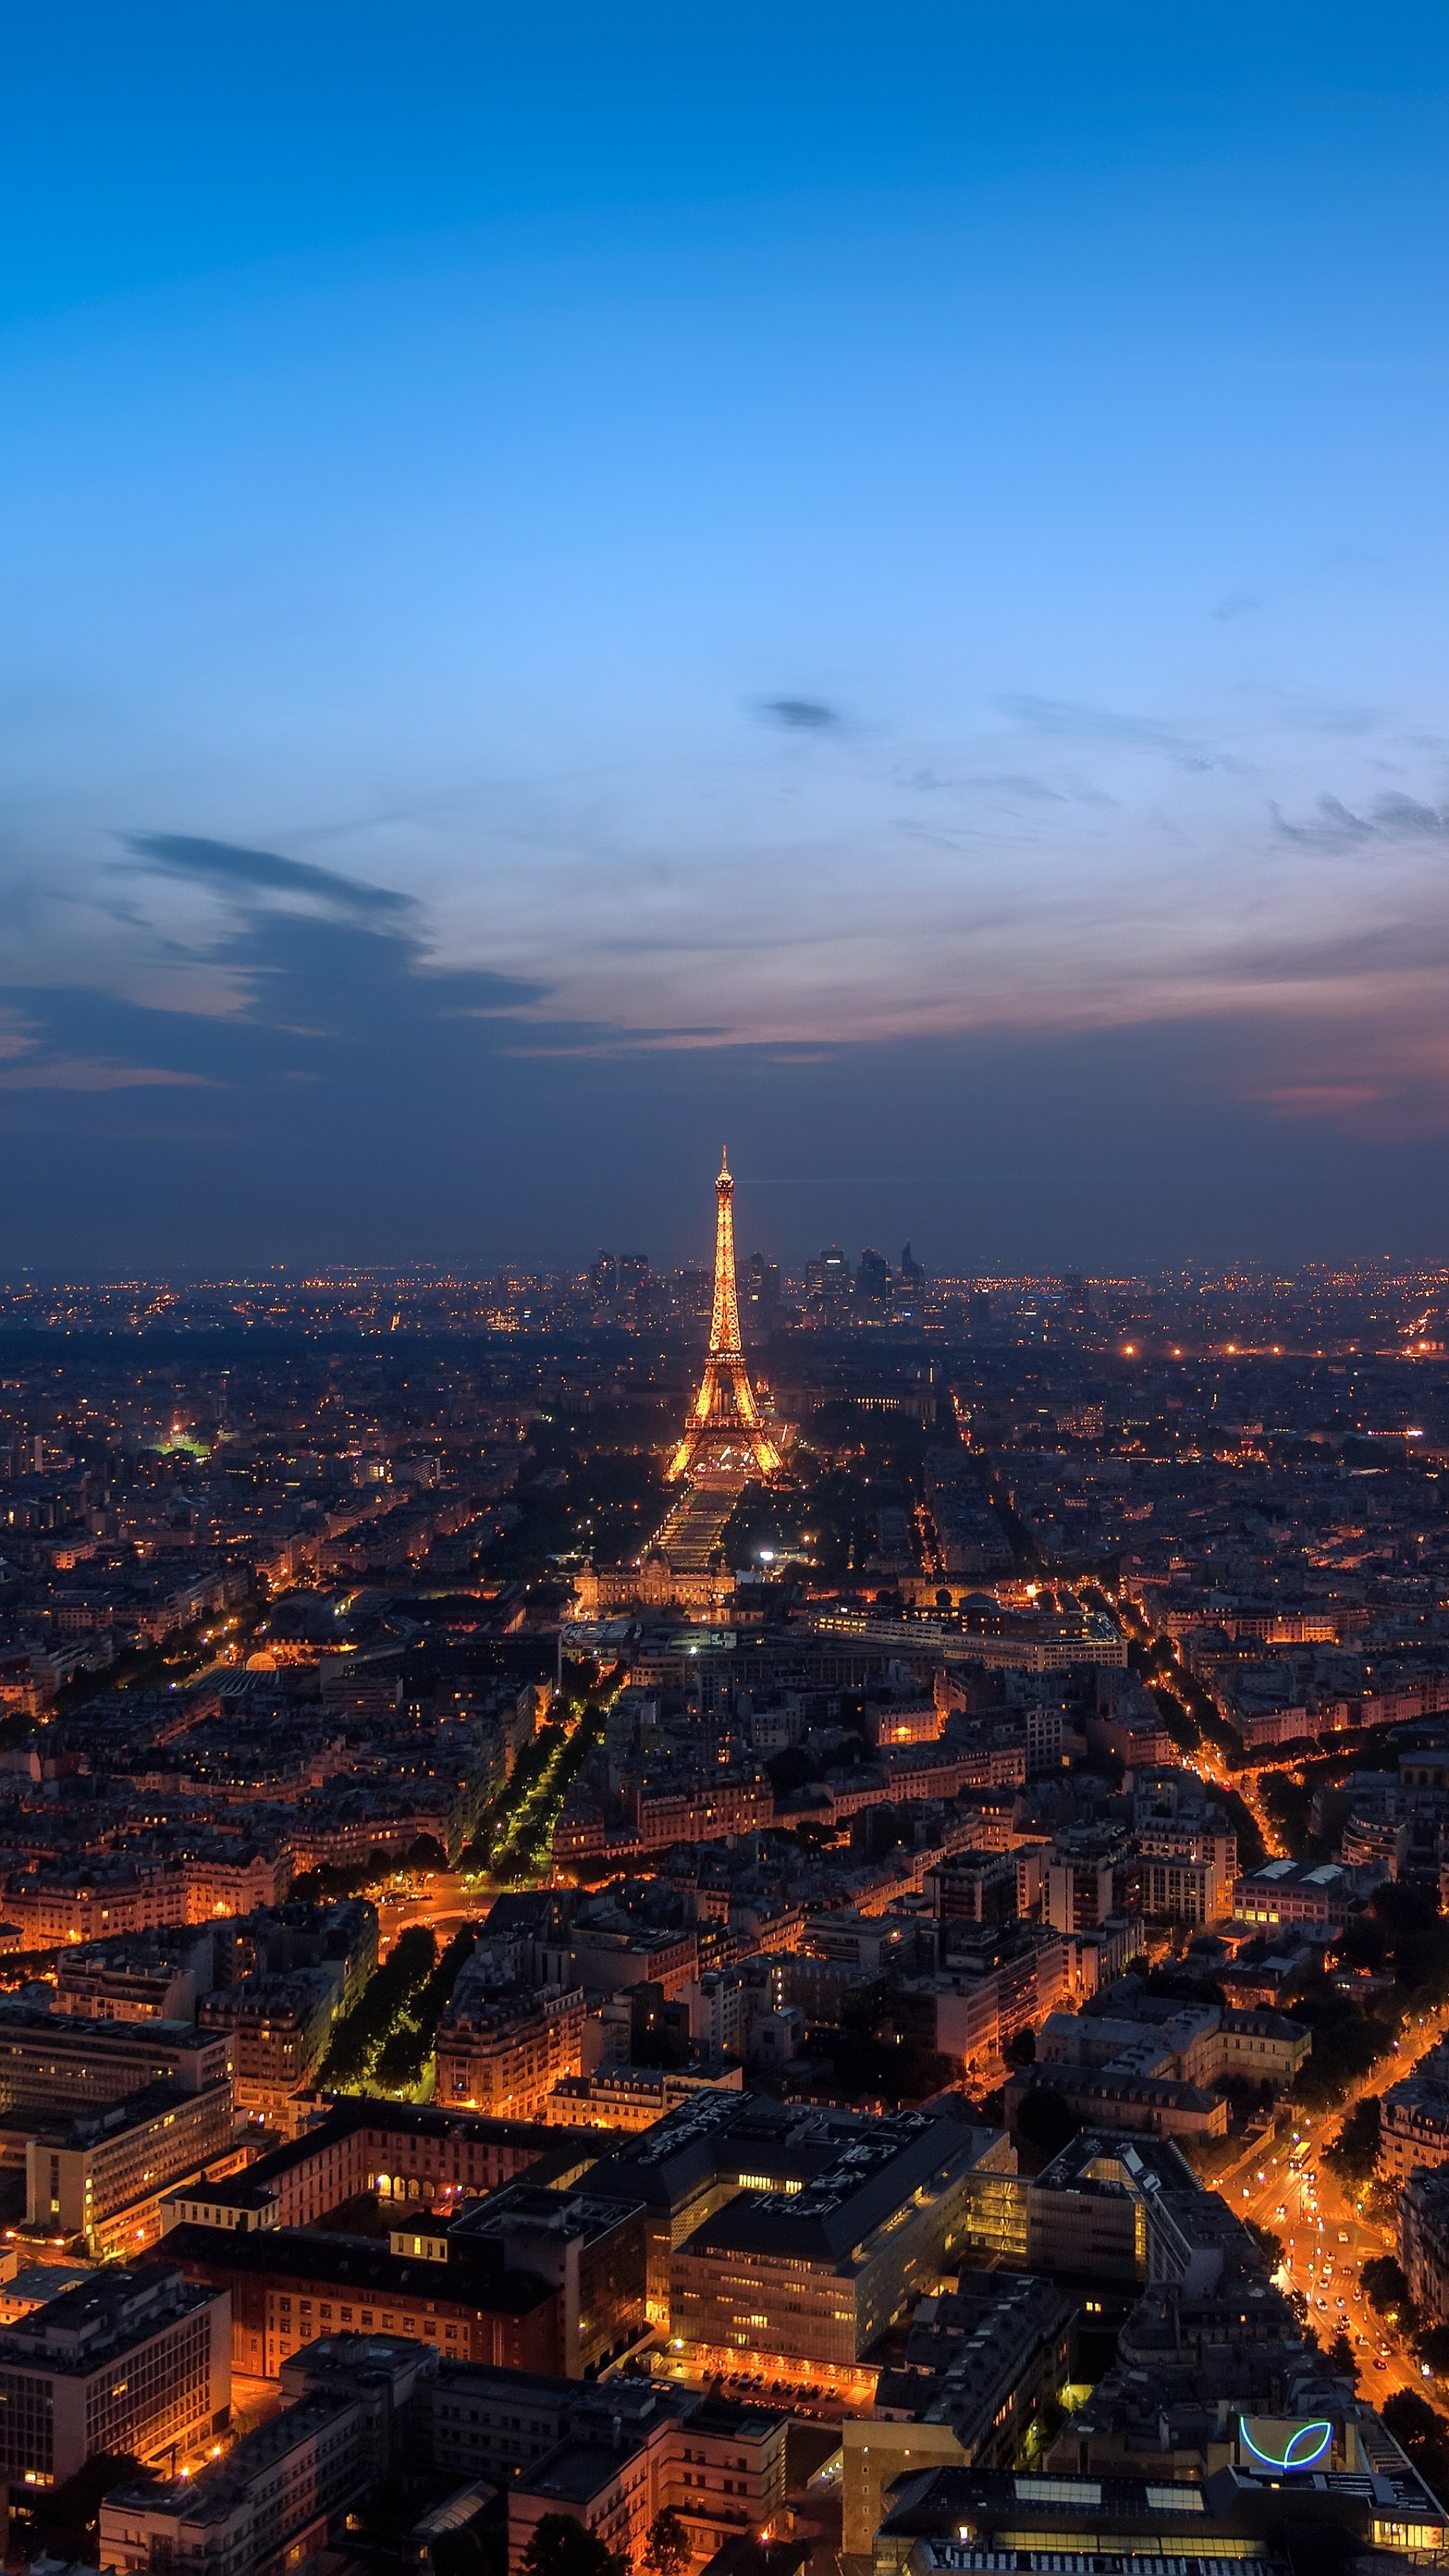 Paris: Its 19th-century cityscape is crisscrossed by wide boulevards and the River Seine. 2160x3840 4K Wallpaper.